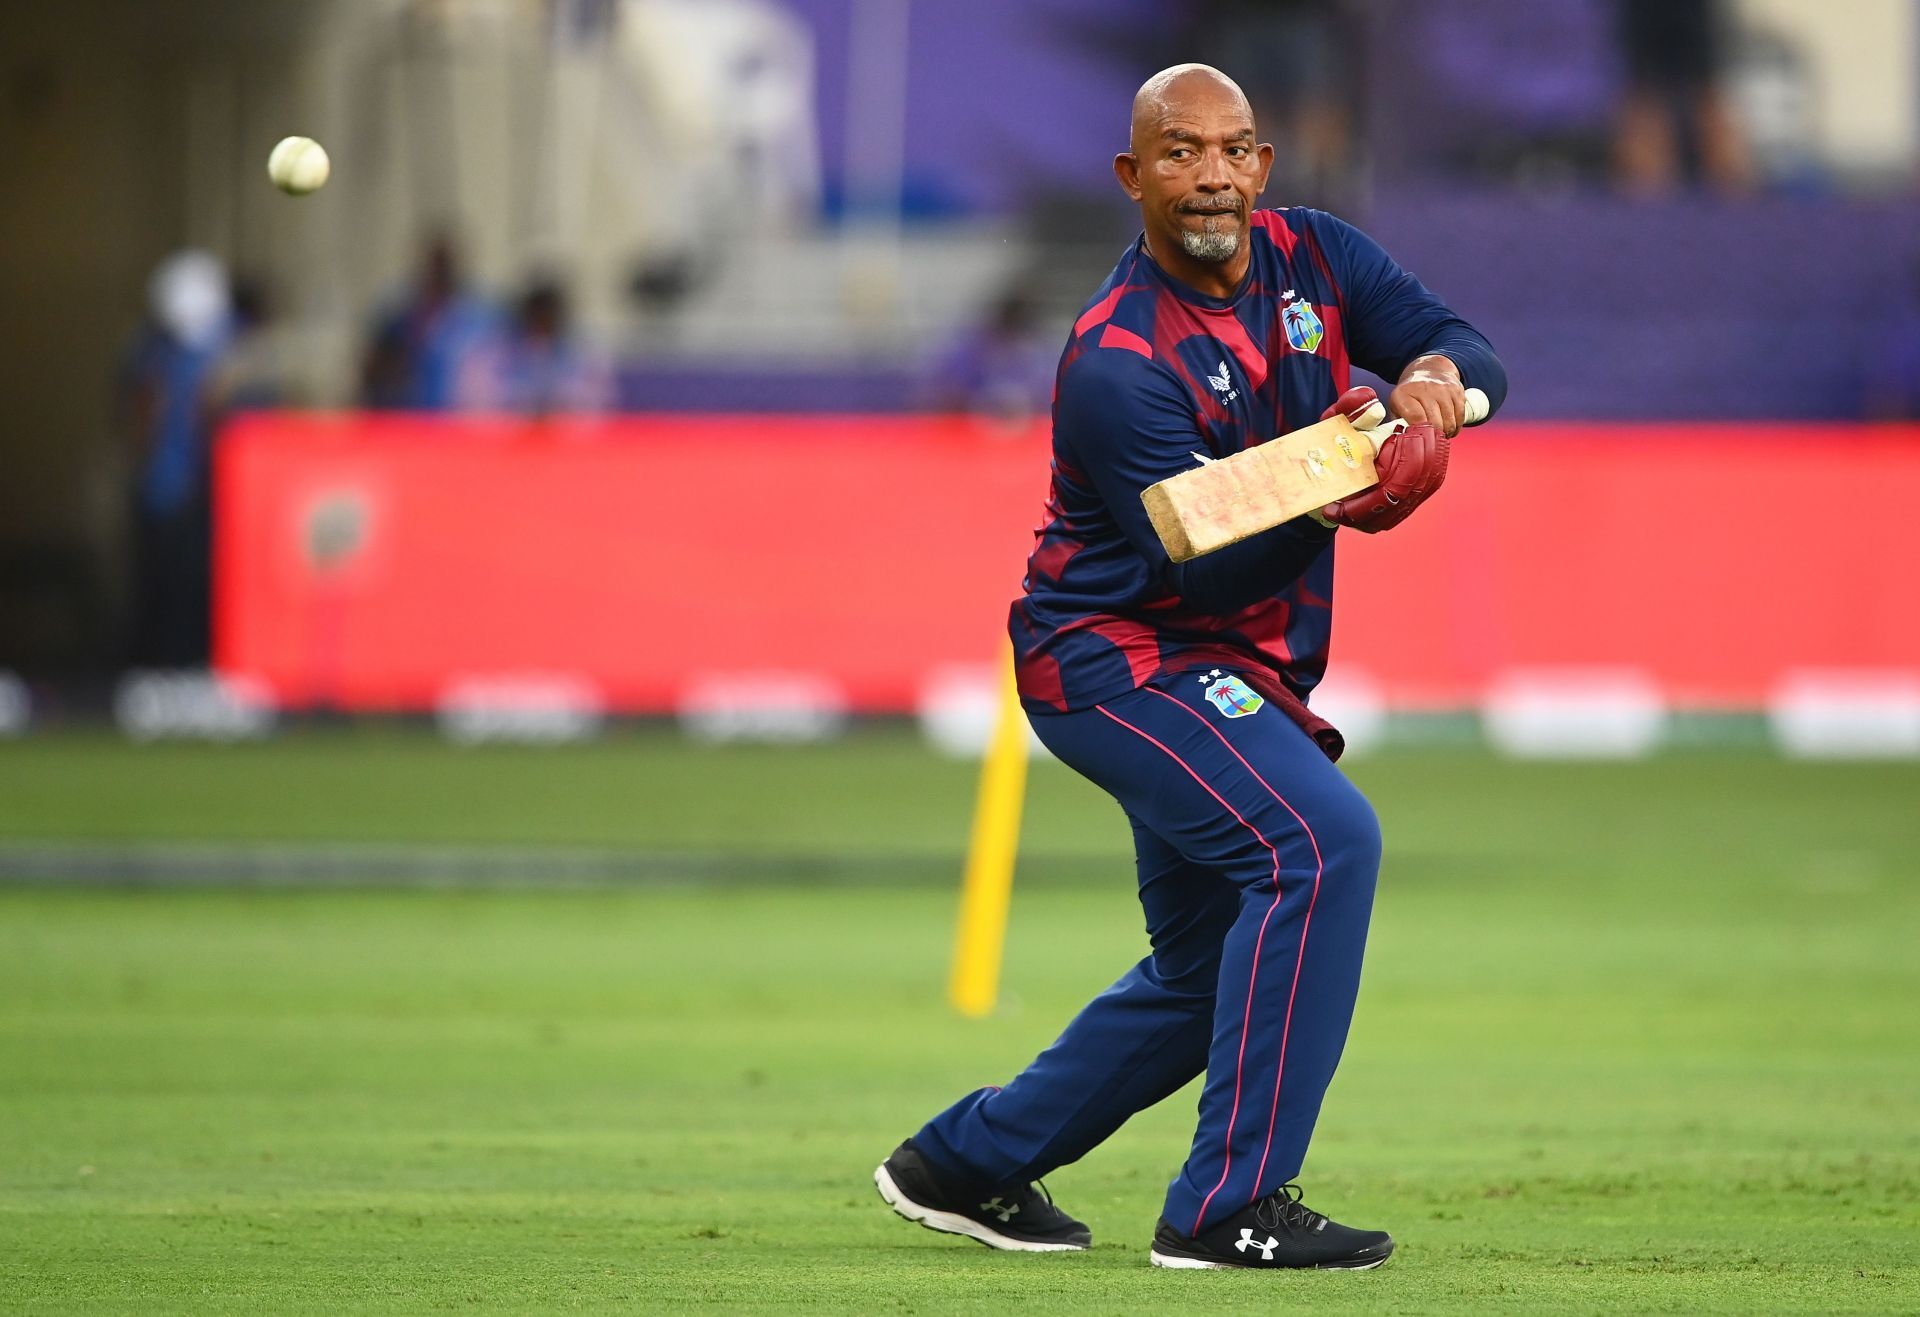 Phil Simmons expects a much better batting performance in the ODI series against India